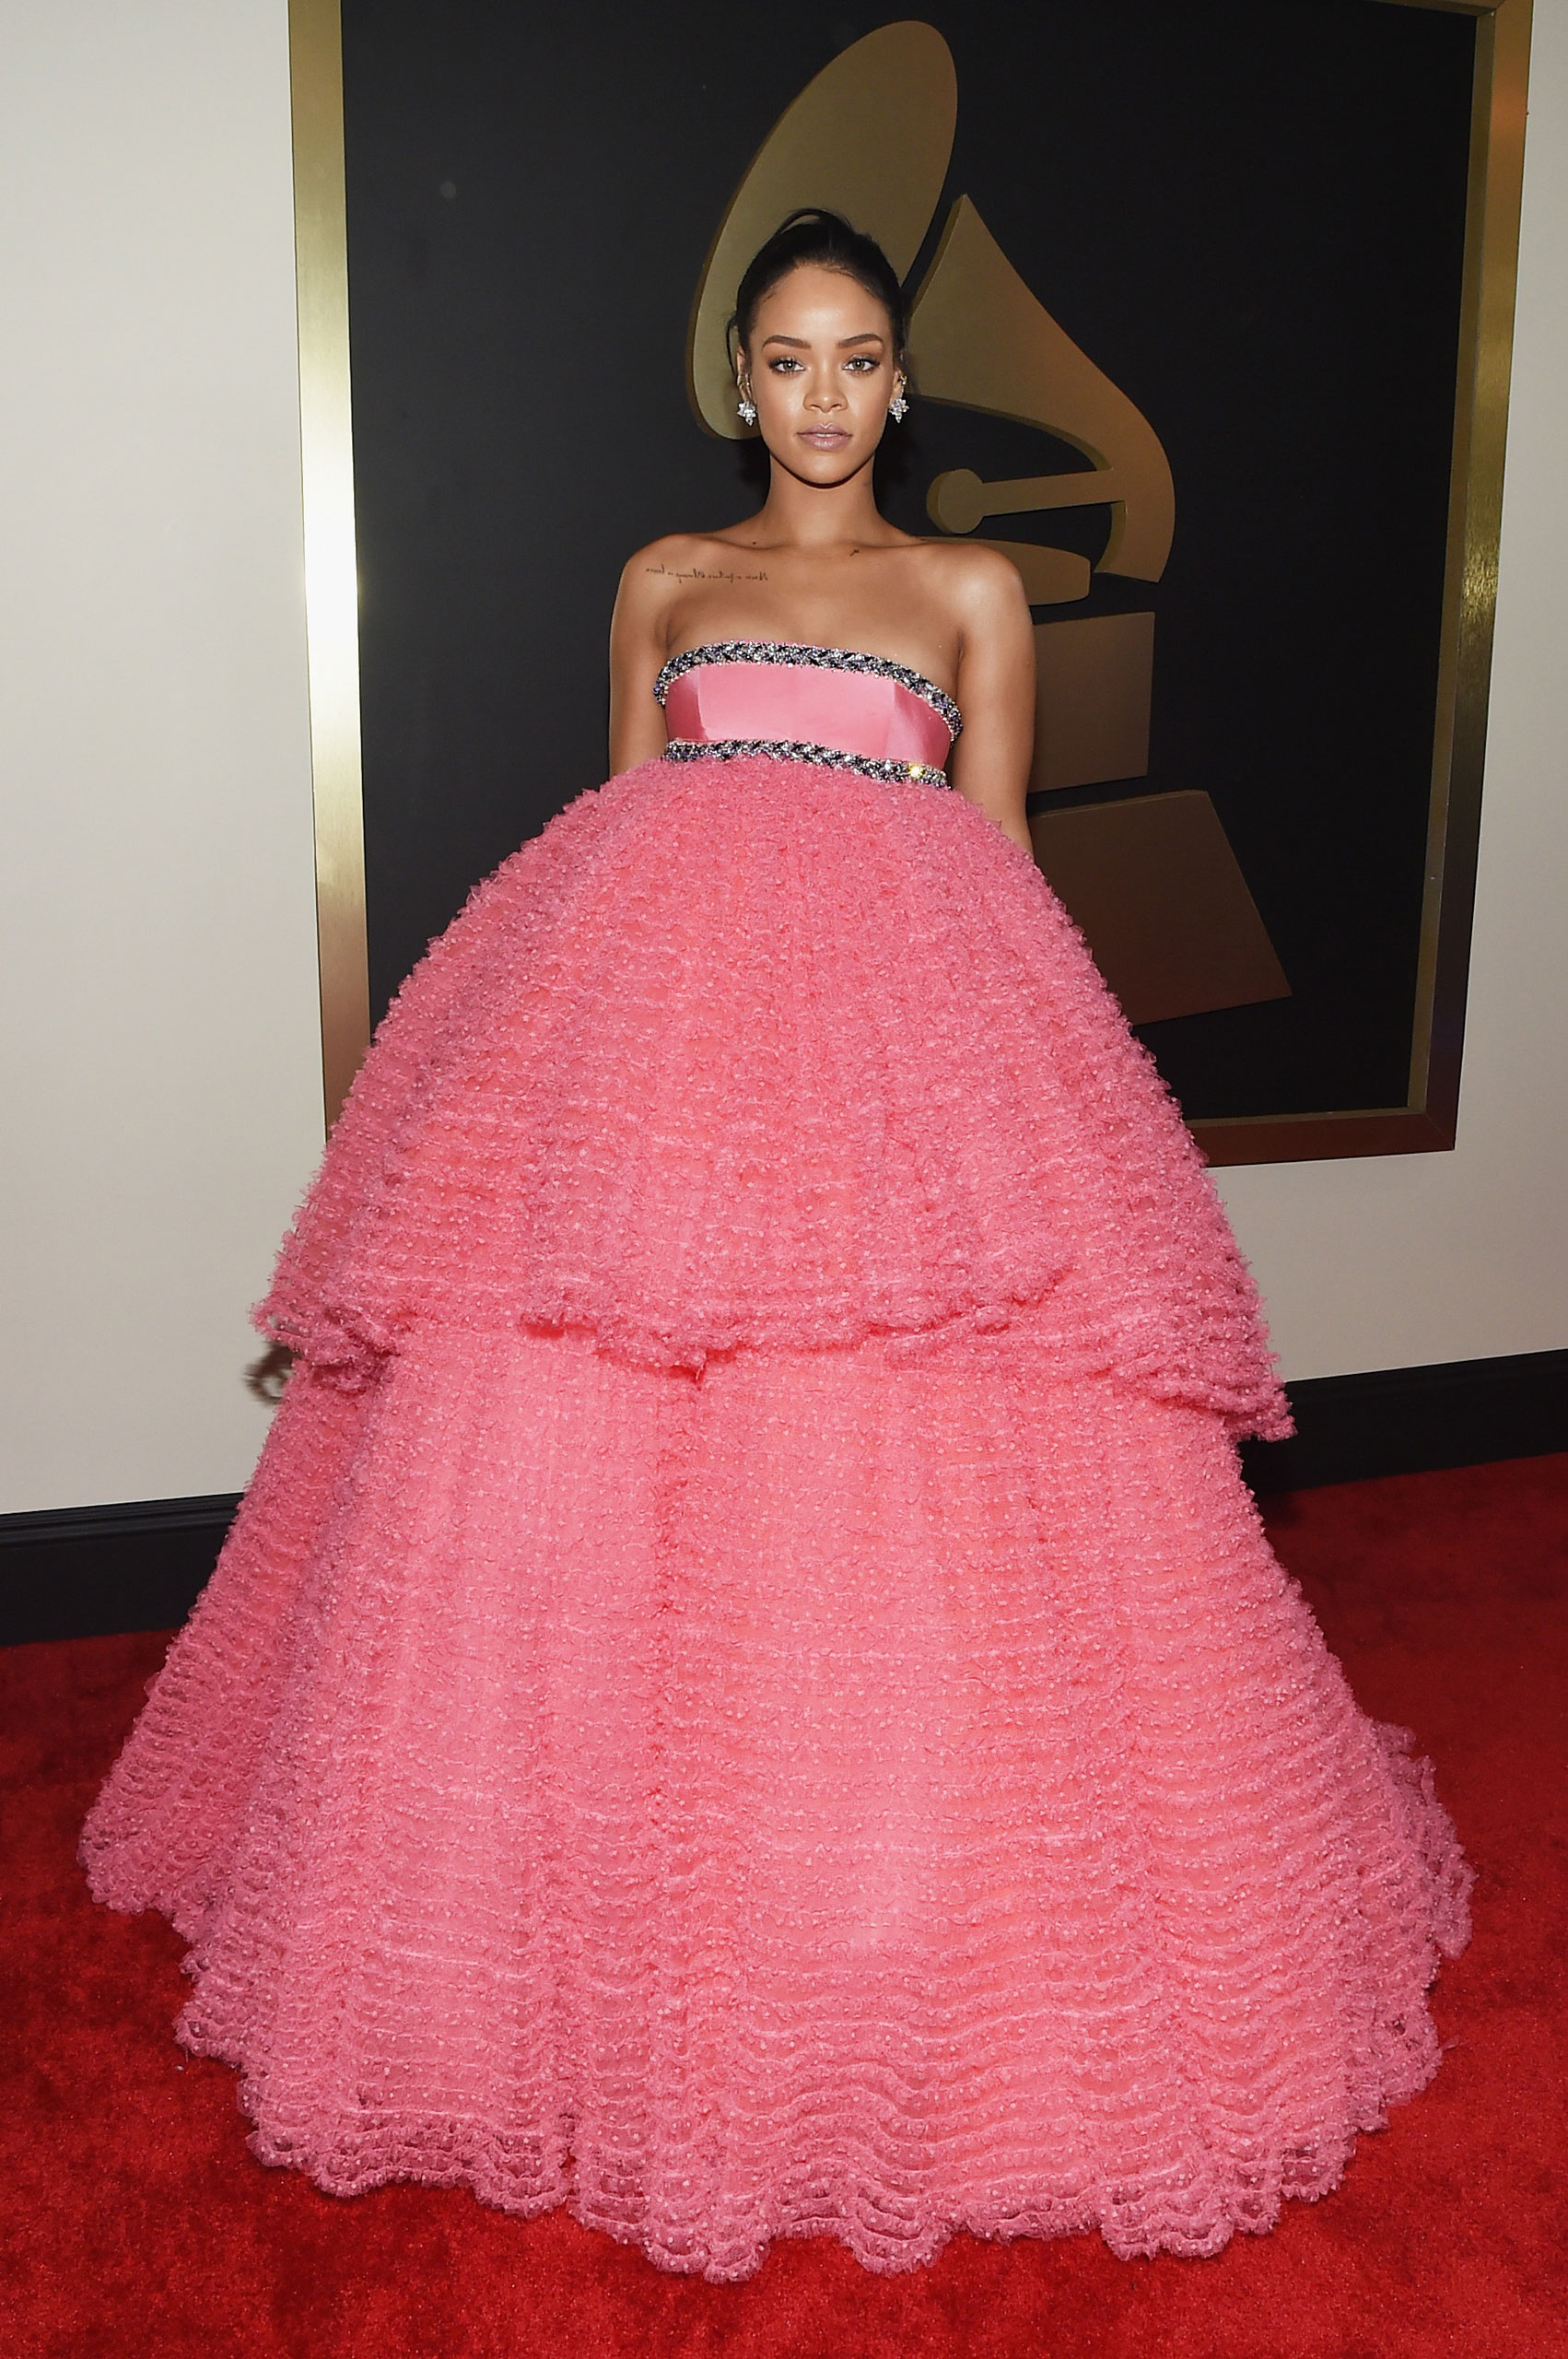 Rihanna attends the 57th Annual Grammy Awards at the Staples Center on Feb. 8, 2015 in Los Angeles, Calif.